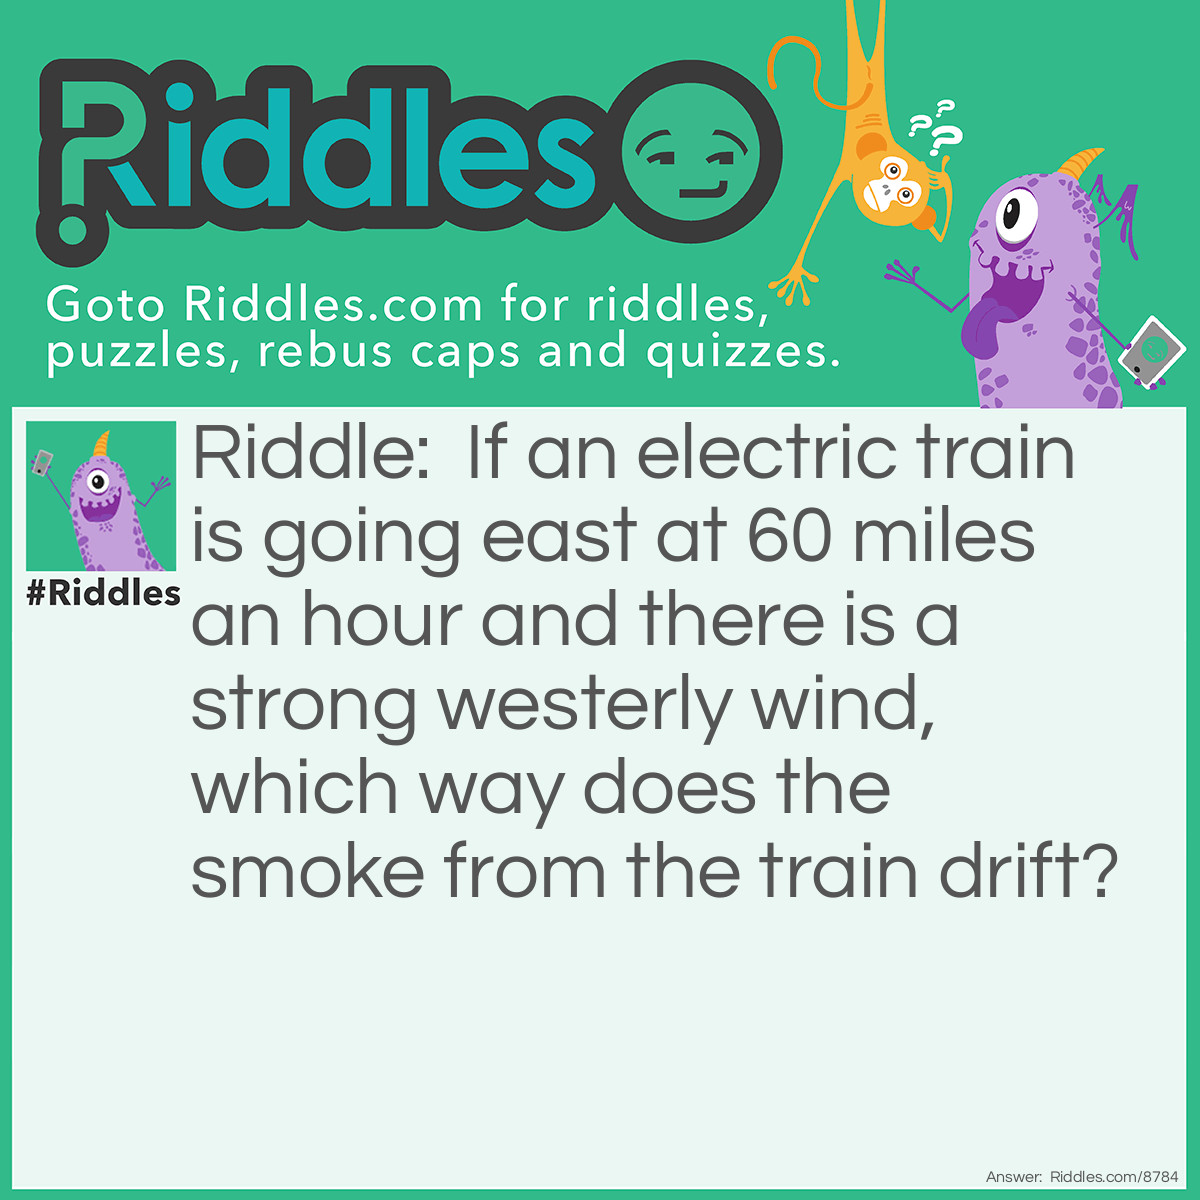 Riddle: If an electric train is going east at 60 miles an hour and there is a strong westerly wind, which way does the smoke from the train drift? Answer: THERE IS NO SMOKE. ELECTRIC TRAIN??